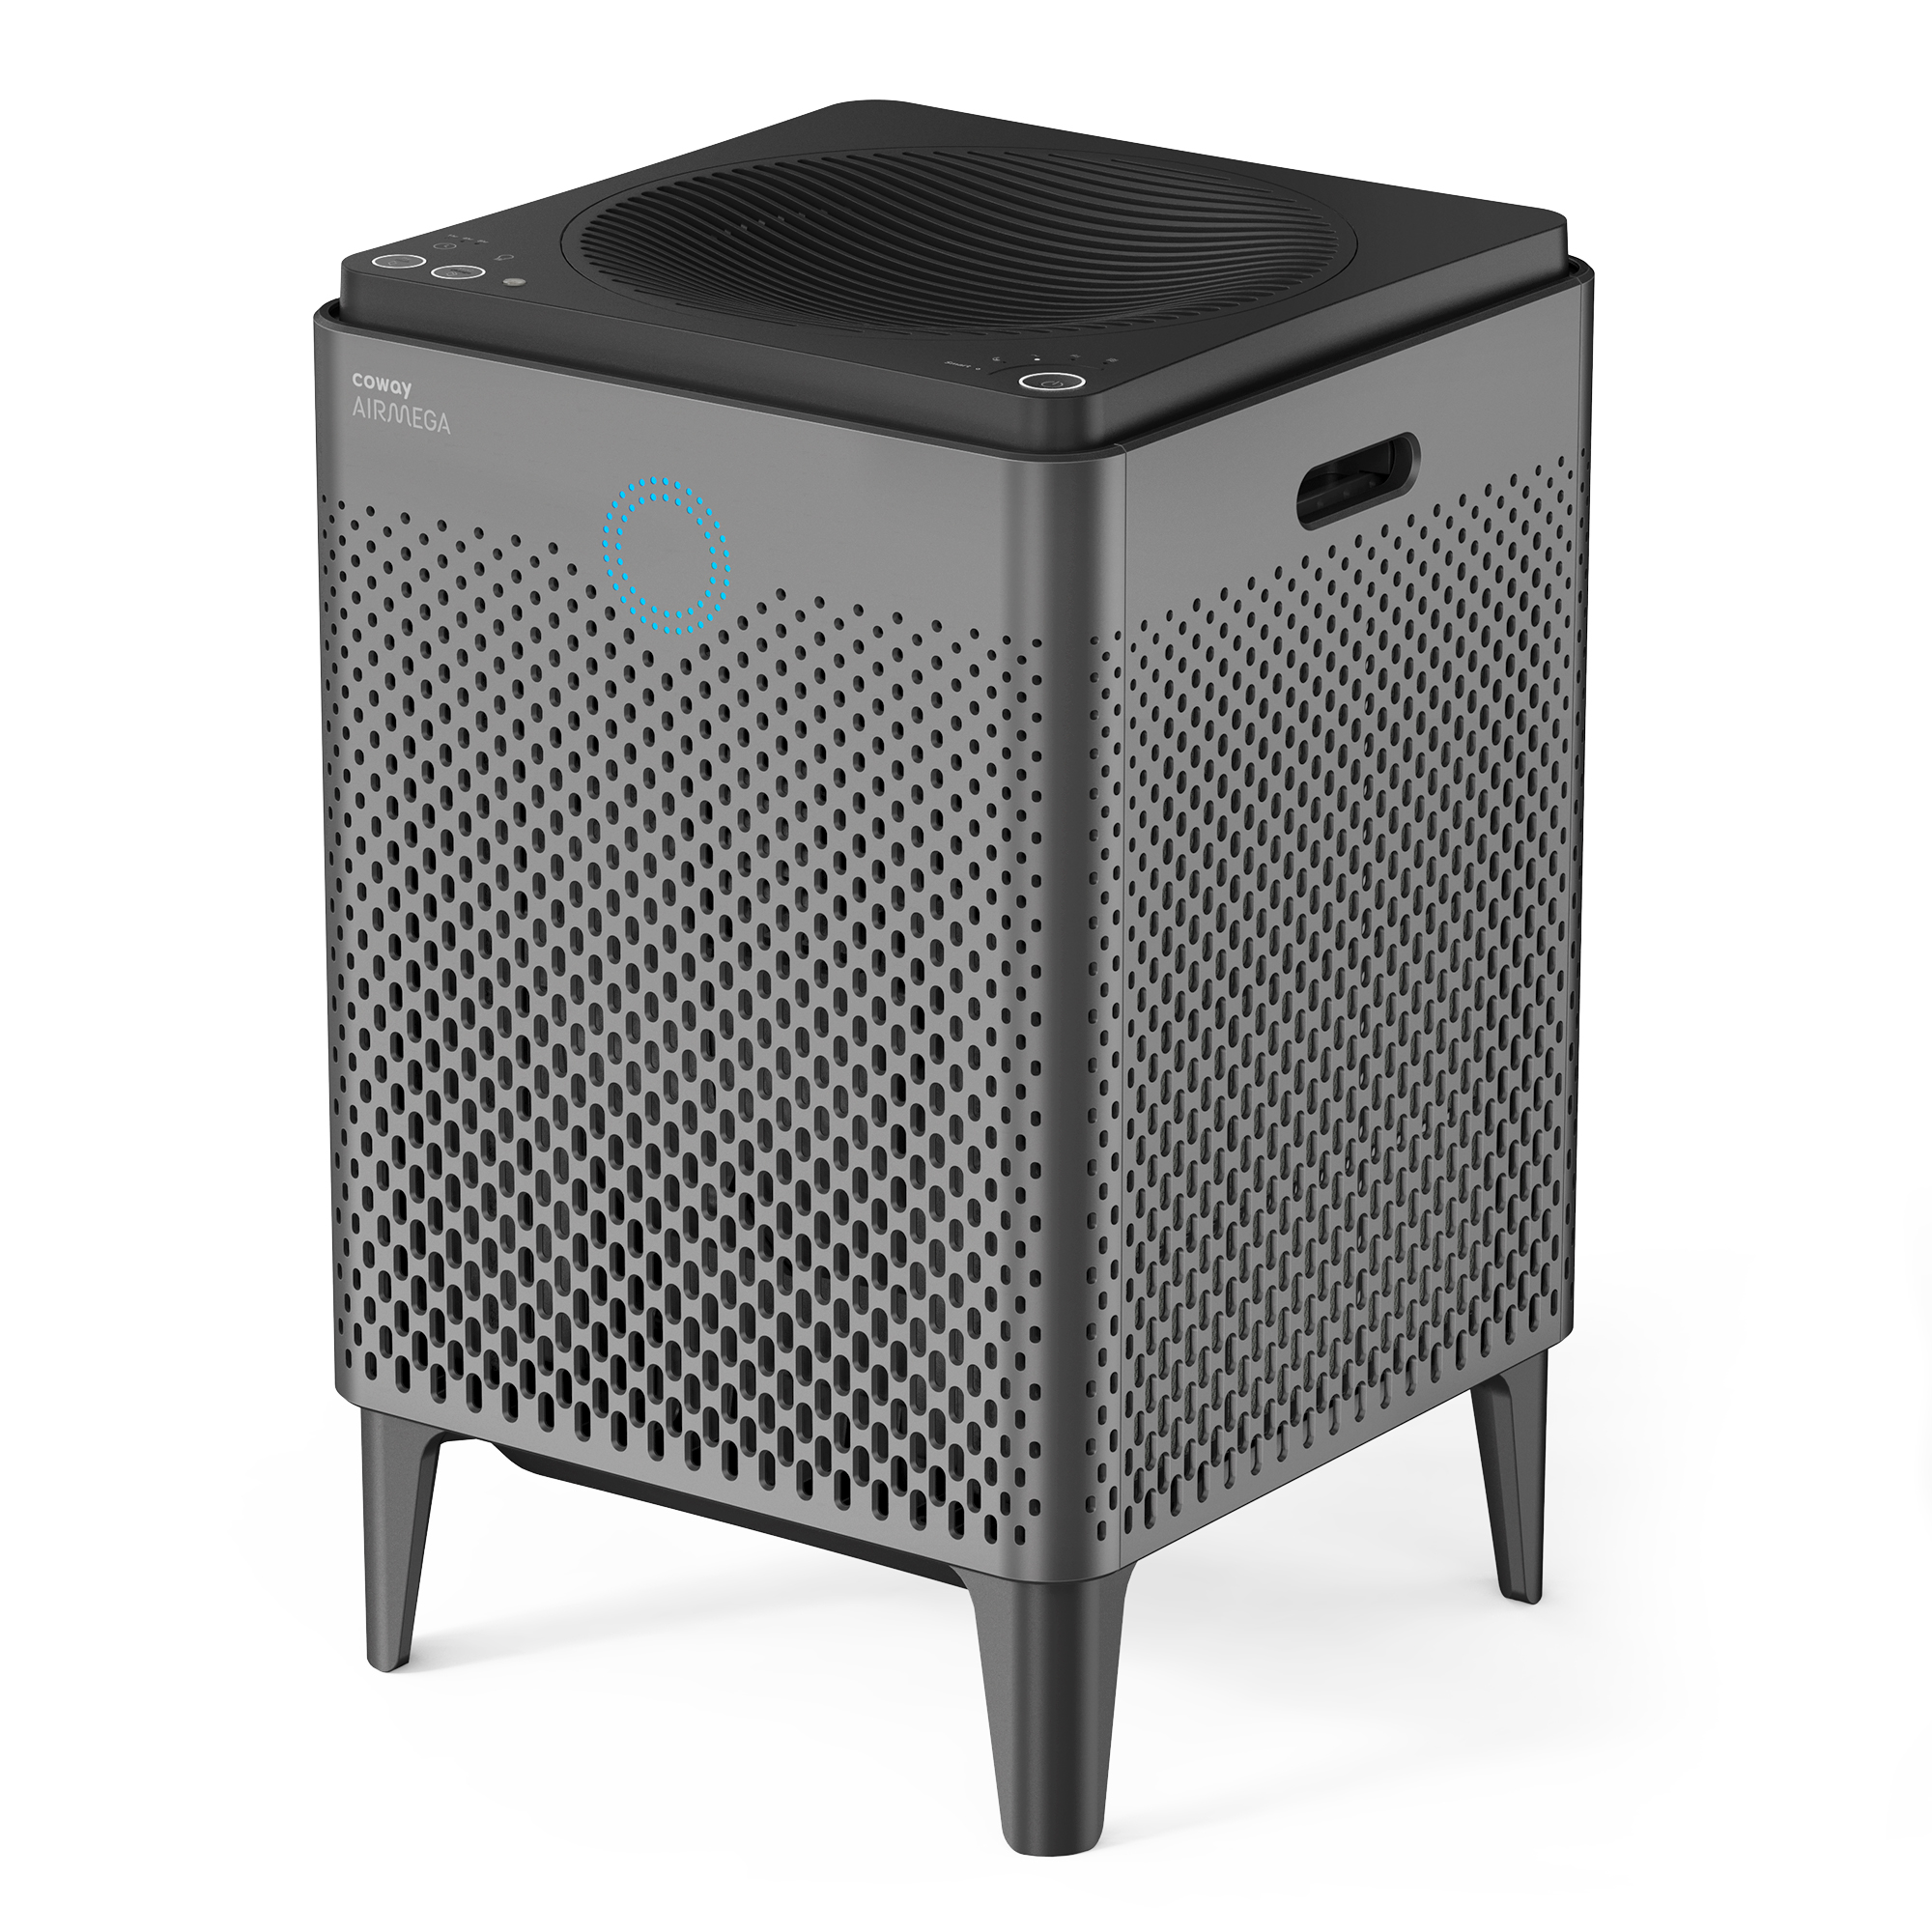 Coway Air Purifier Airmega 400 Graphite True HEPA Air Purifier with 1560 sq ft Coverage, Auto, Eco, & Sleep Mode, Air Quality & Filter Replacement Indicator - image 1 of 7